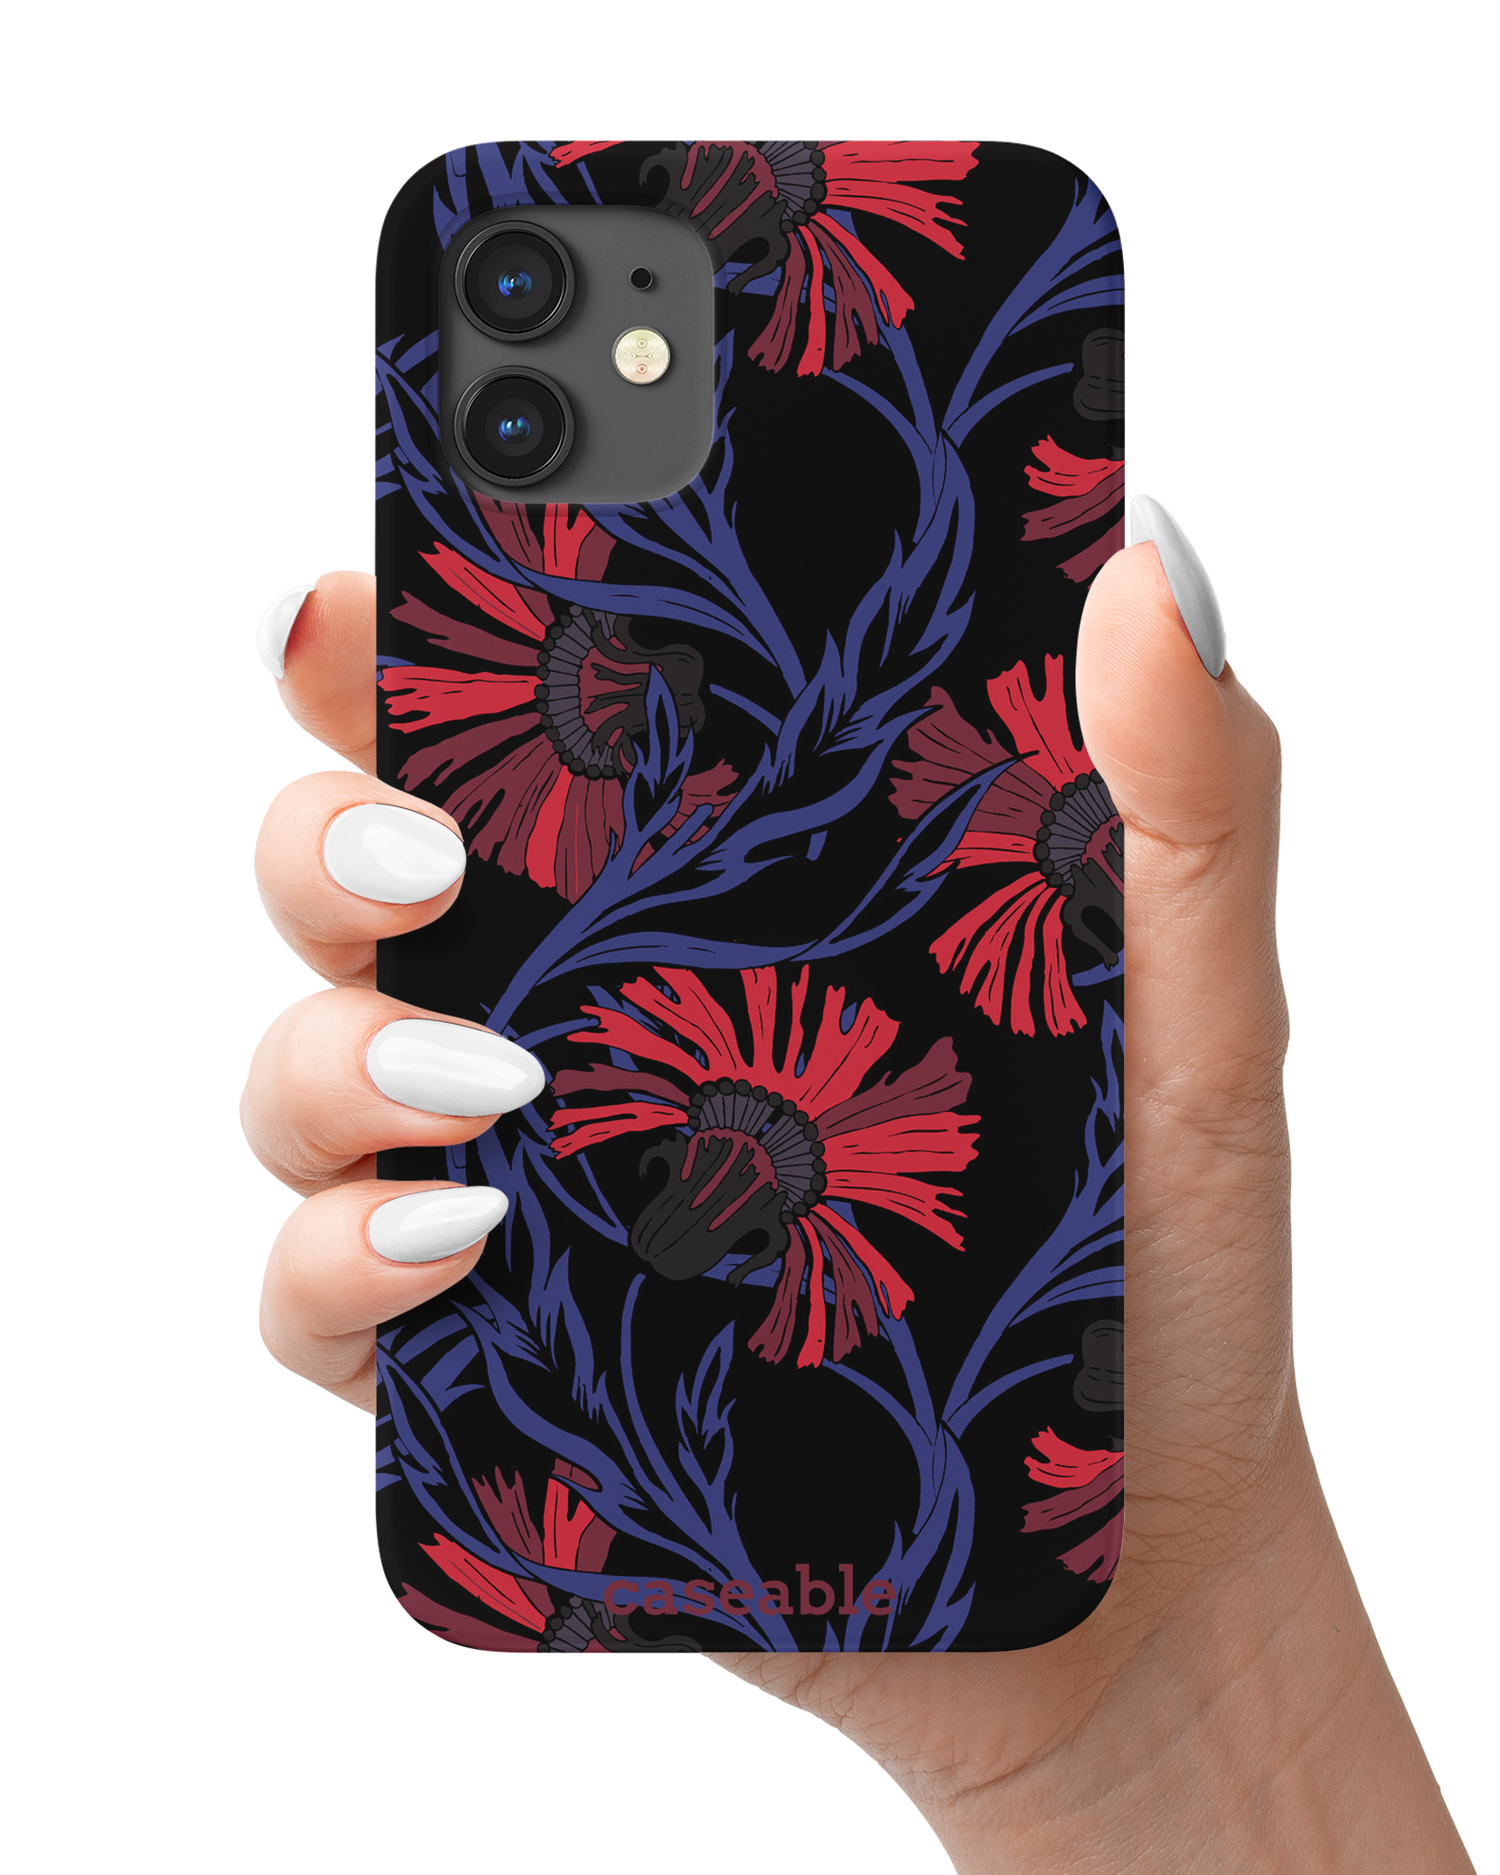 Midnight Floral Hard Shell Phone Case Apple iPhone 12 mini held in hand